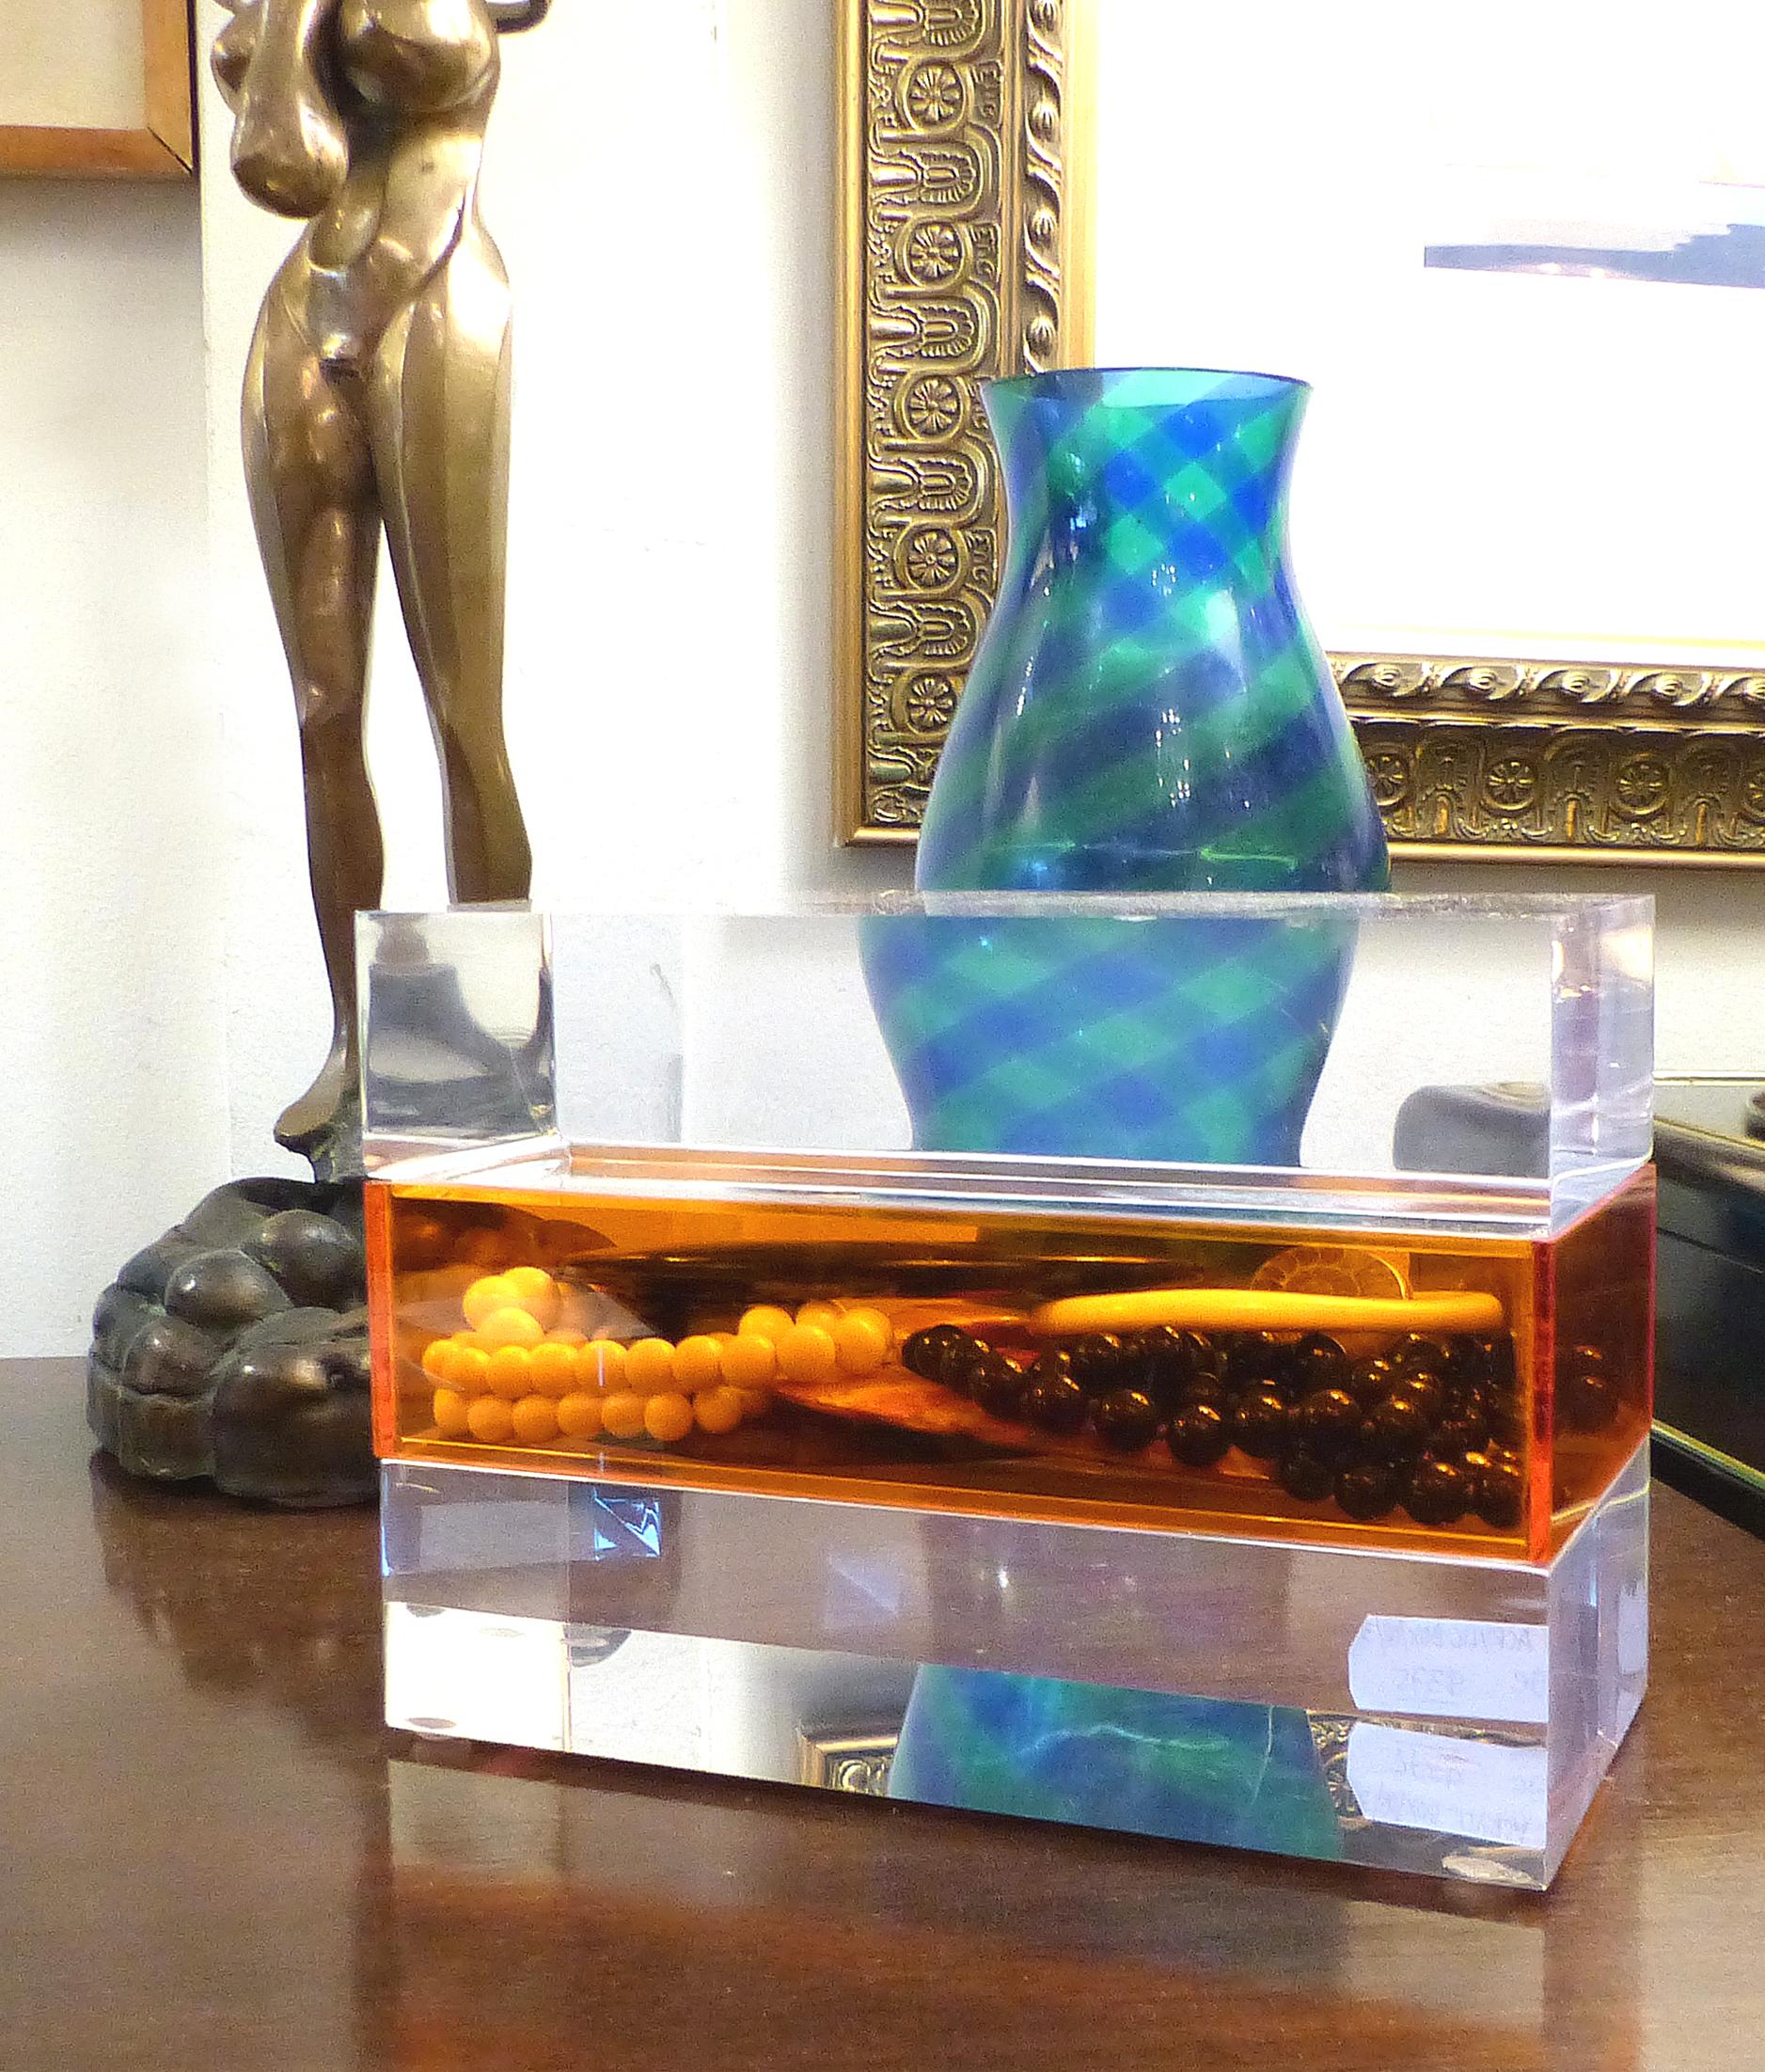 Offered for sale is a clear and orange Lucite trinket or jewelry box. The box offers a sleek storage solution with an orange compartment sandwiched between two thick slabs of Lucite. The top section is the lid which lifts off.